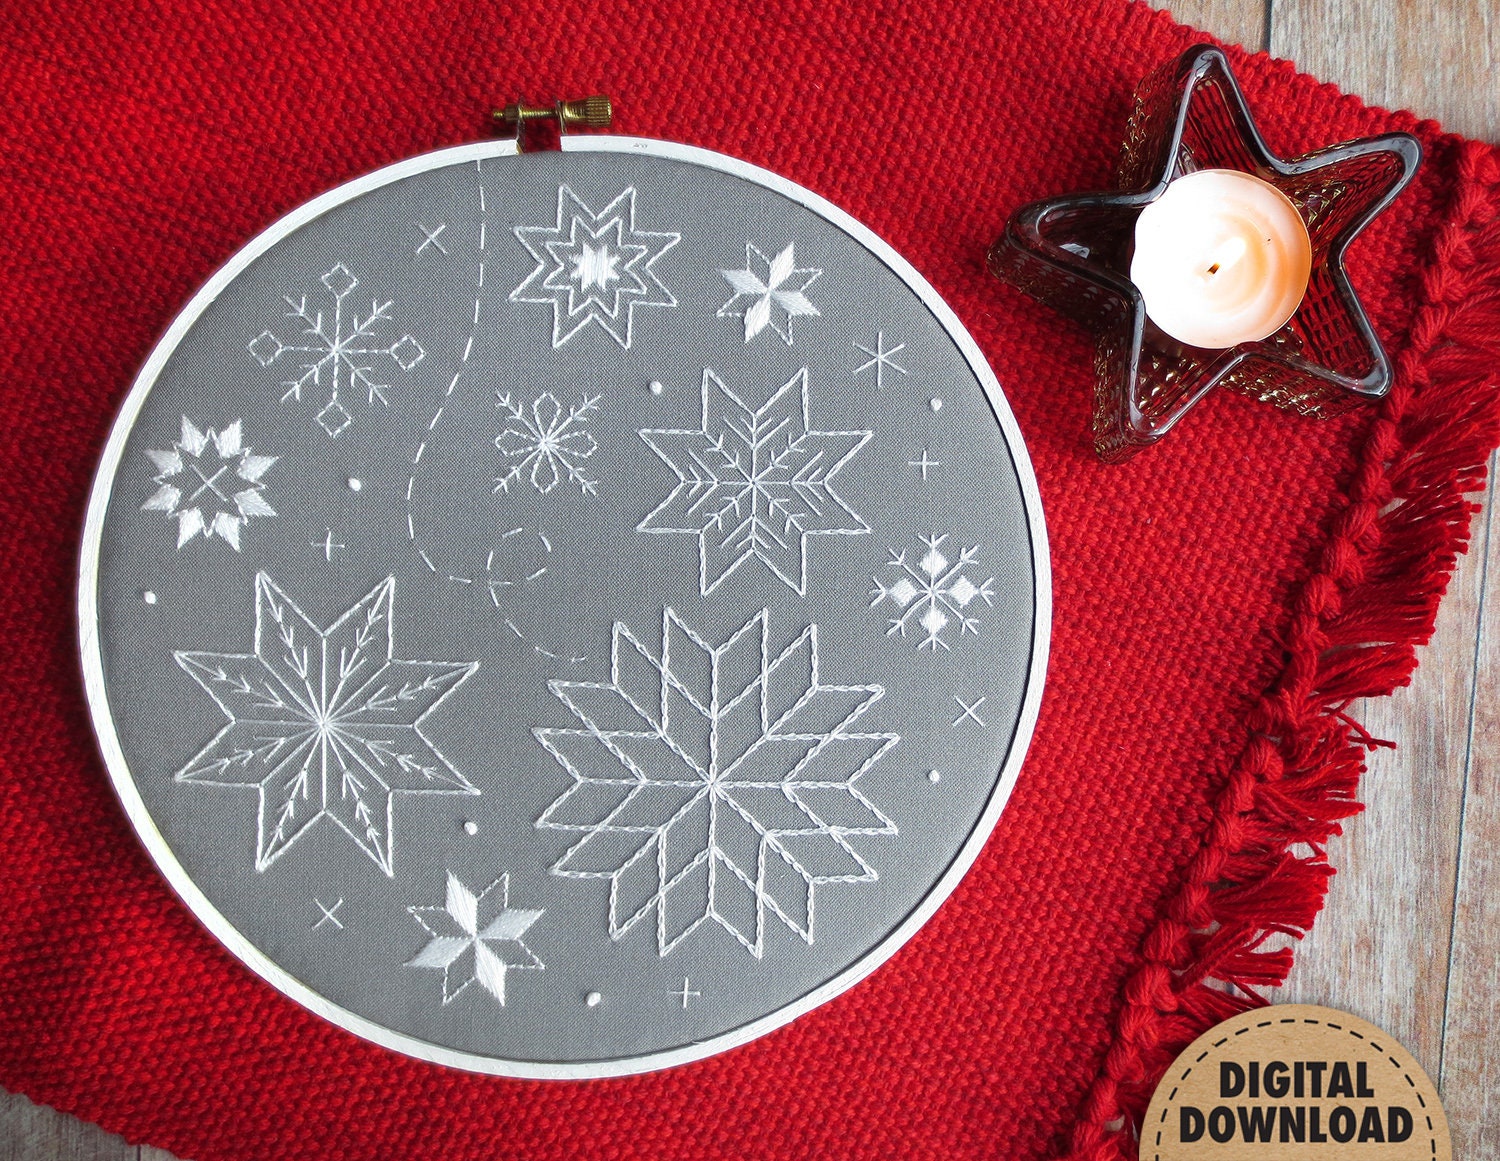 Embroidery Files Instant Download Embroidery Patterns Love Winter Snowflake Quilt Block -Machine Embroidery Design Embroidery Designs